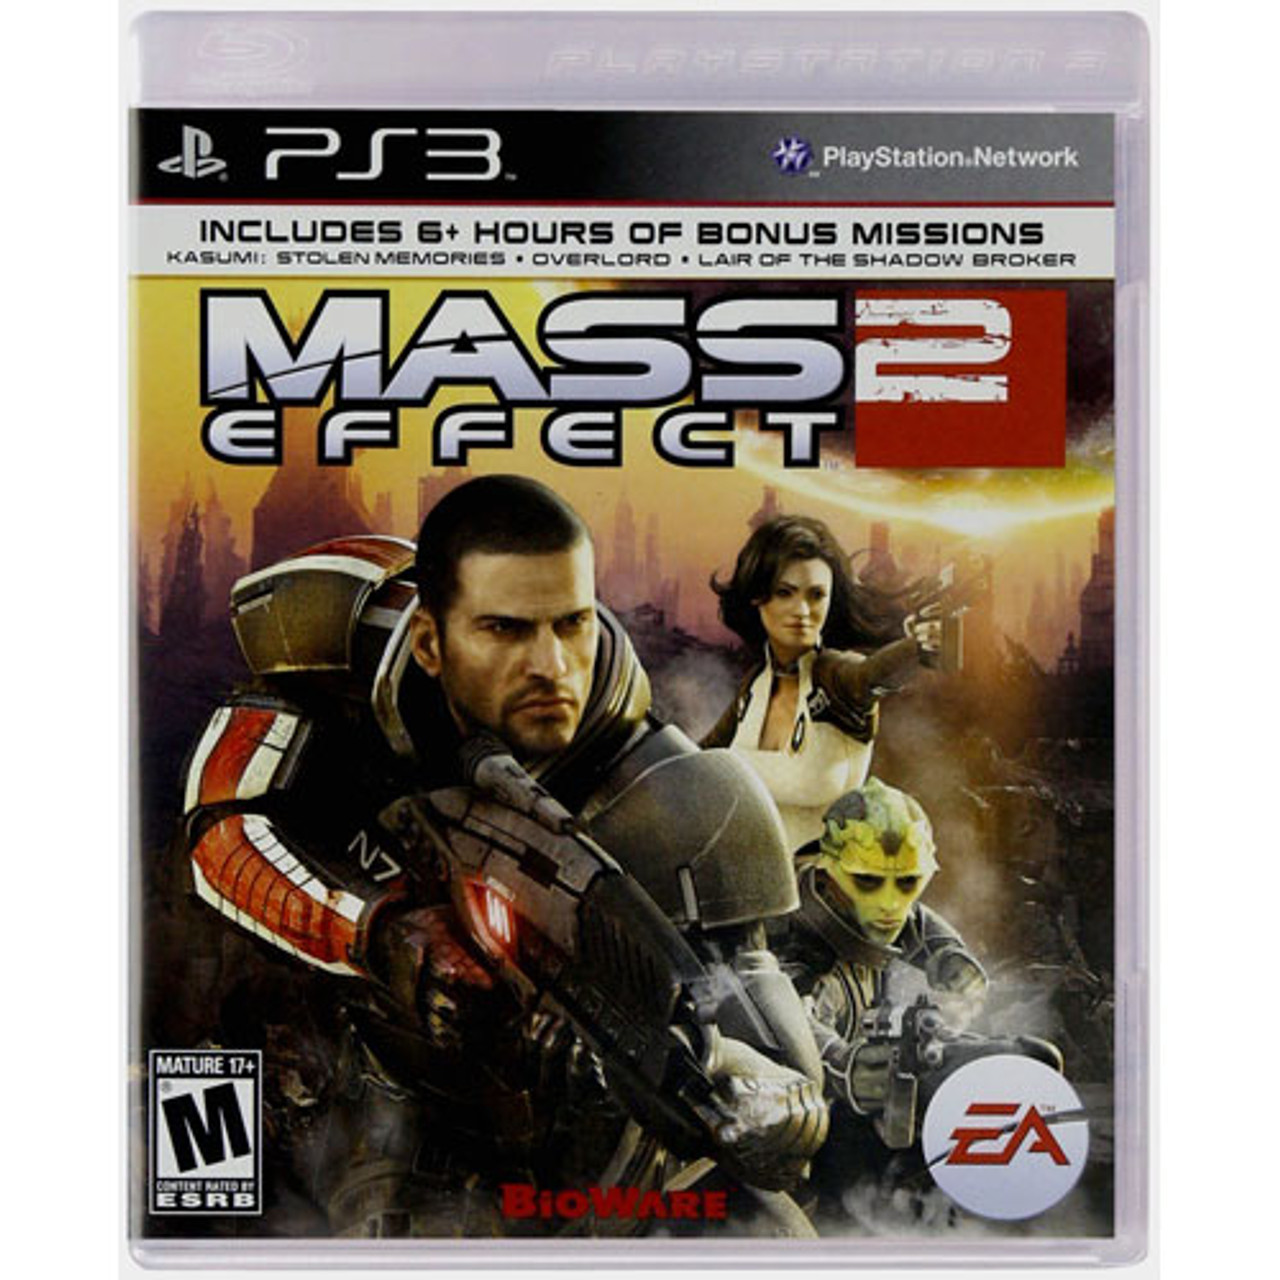 Mass Effect 2 - PS3 Game